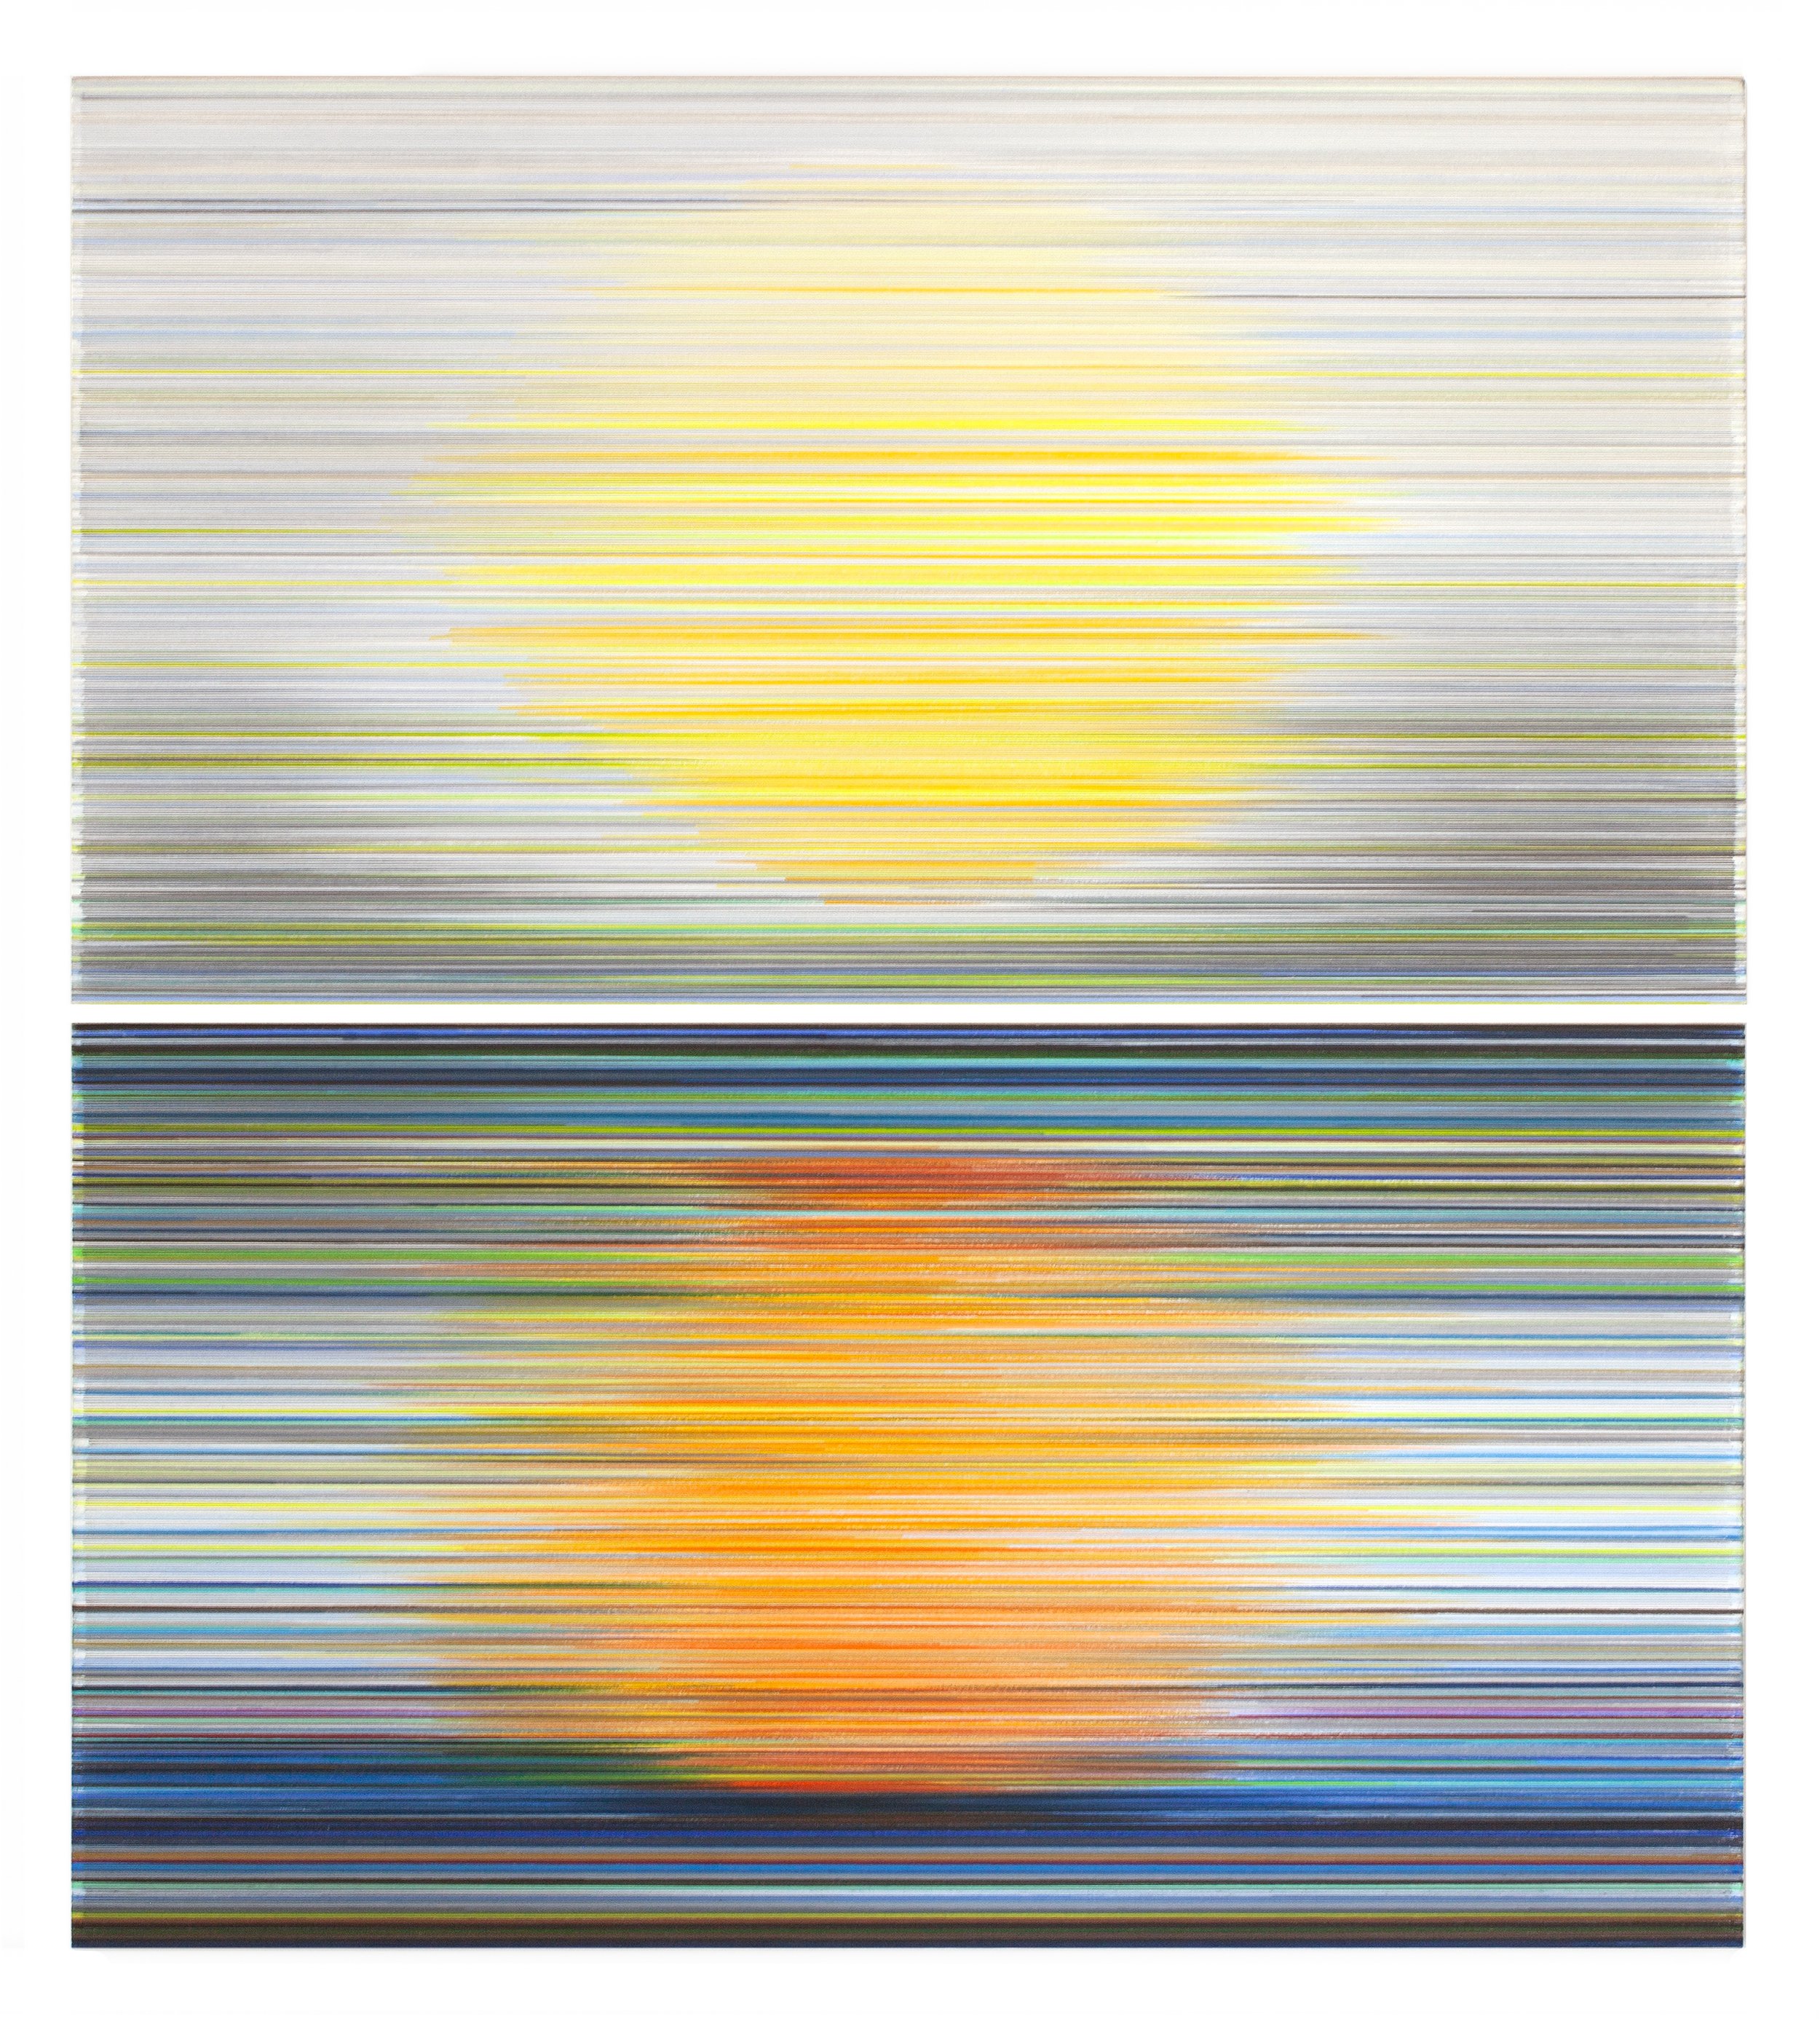    two suns   2023 graphite and colored pencil on mat board 41 x 36 inches (in two panels) 